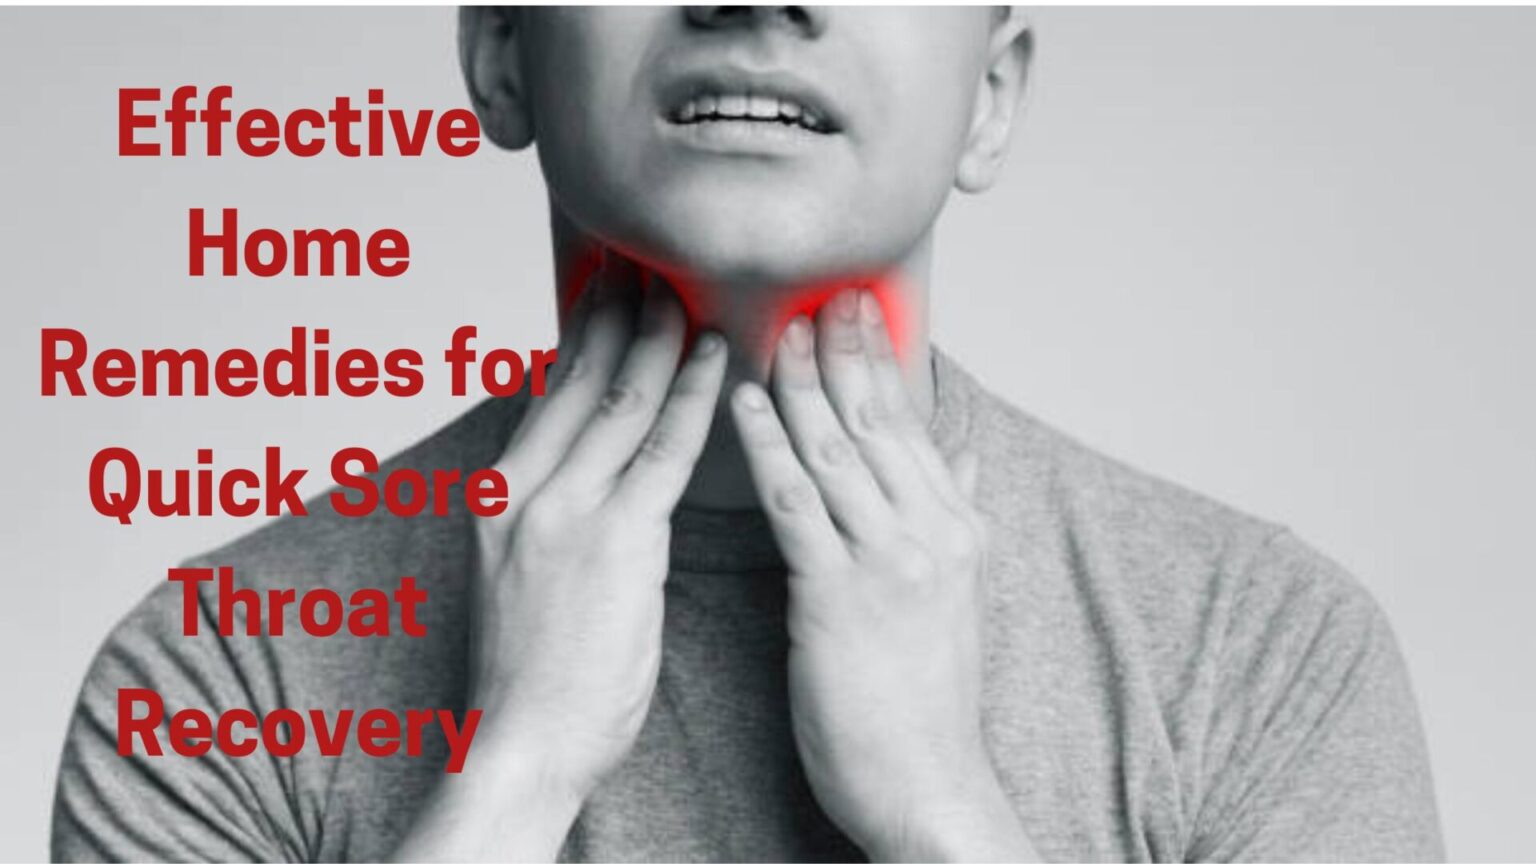 Effective Home Remedies for Quick Sore Throat Recovery